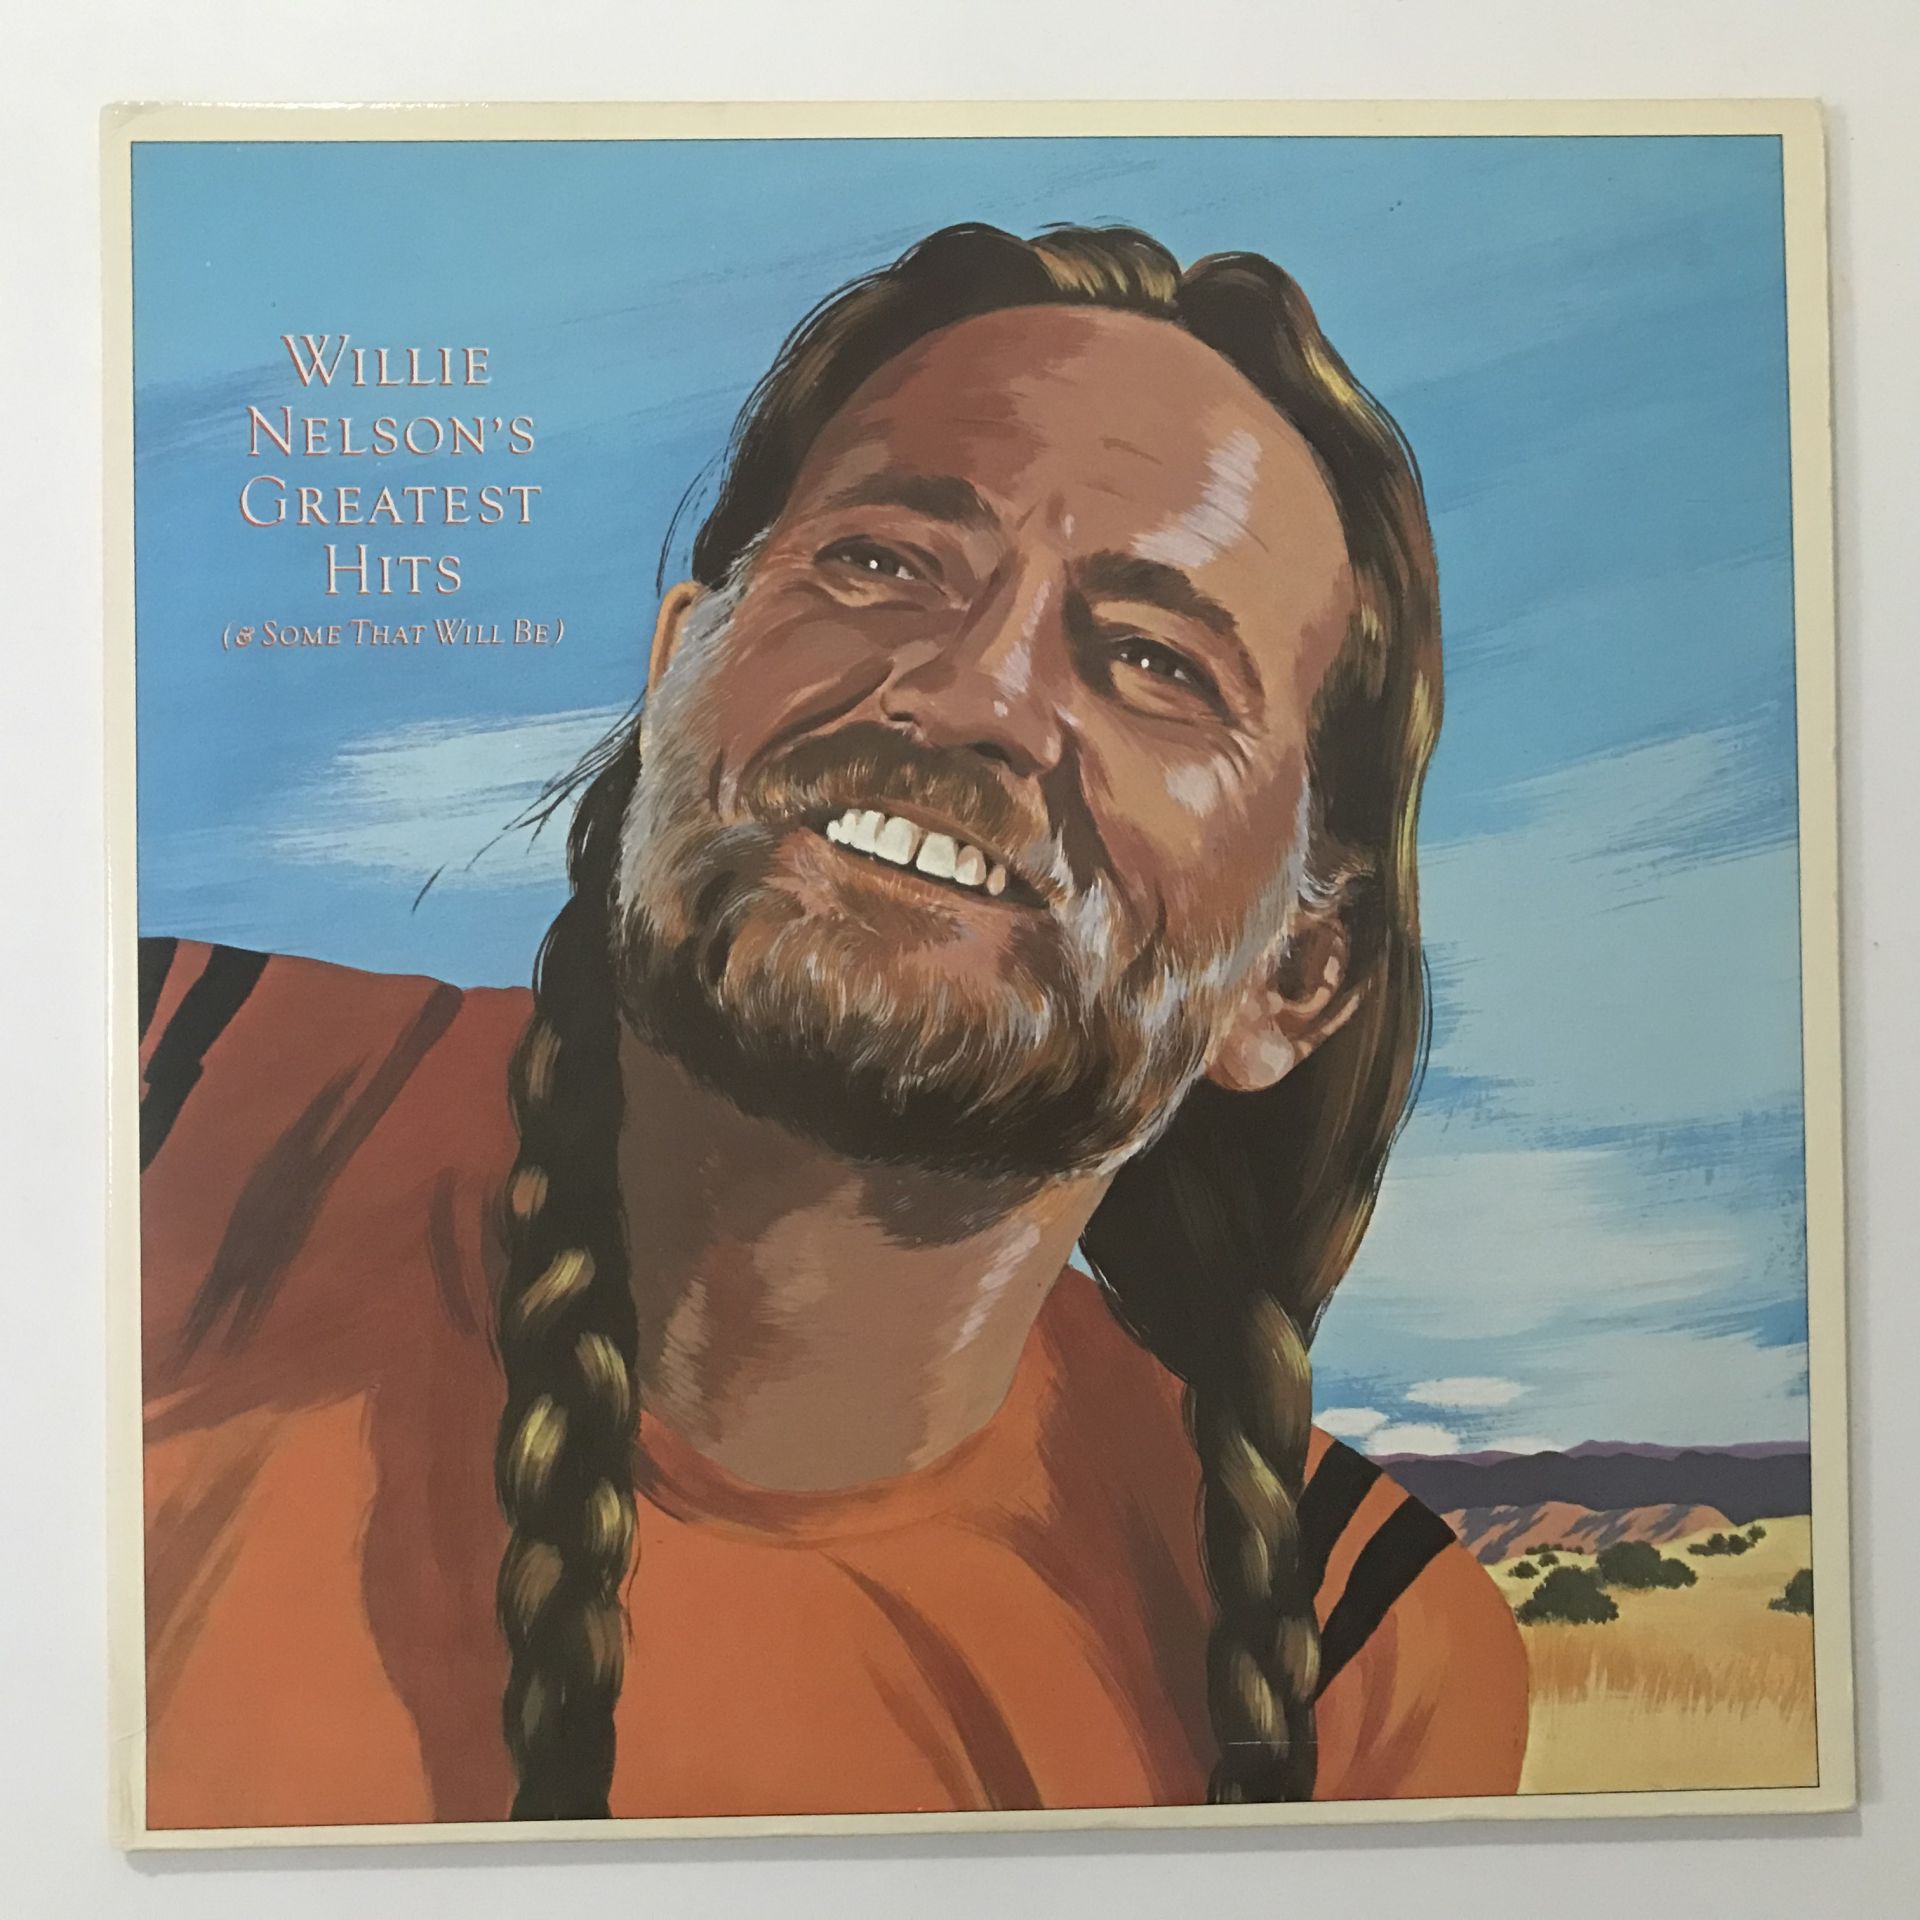 Willie Nelson ‎– Greatest Hits (& Some That Will Be) 2 LP